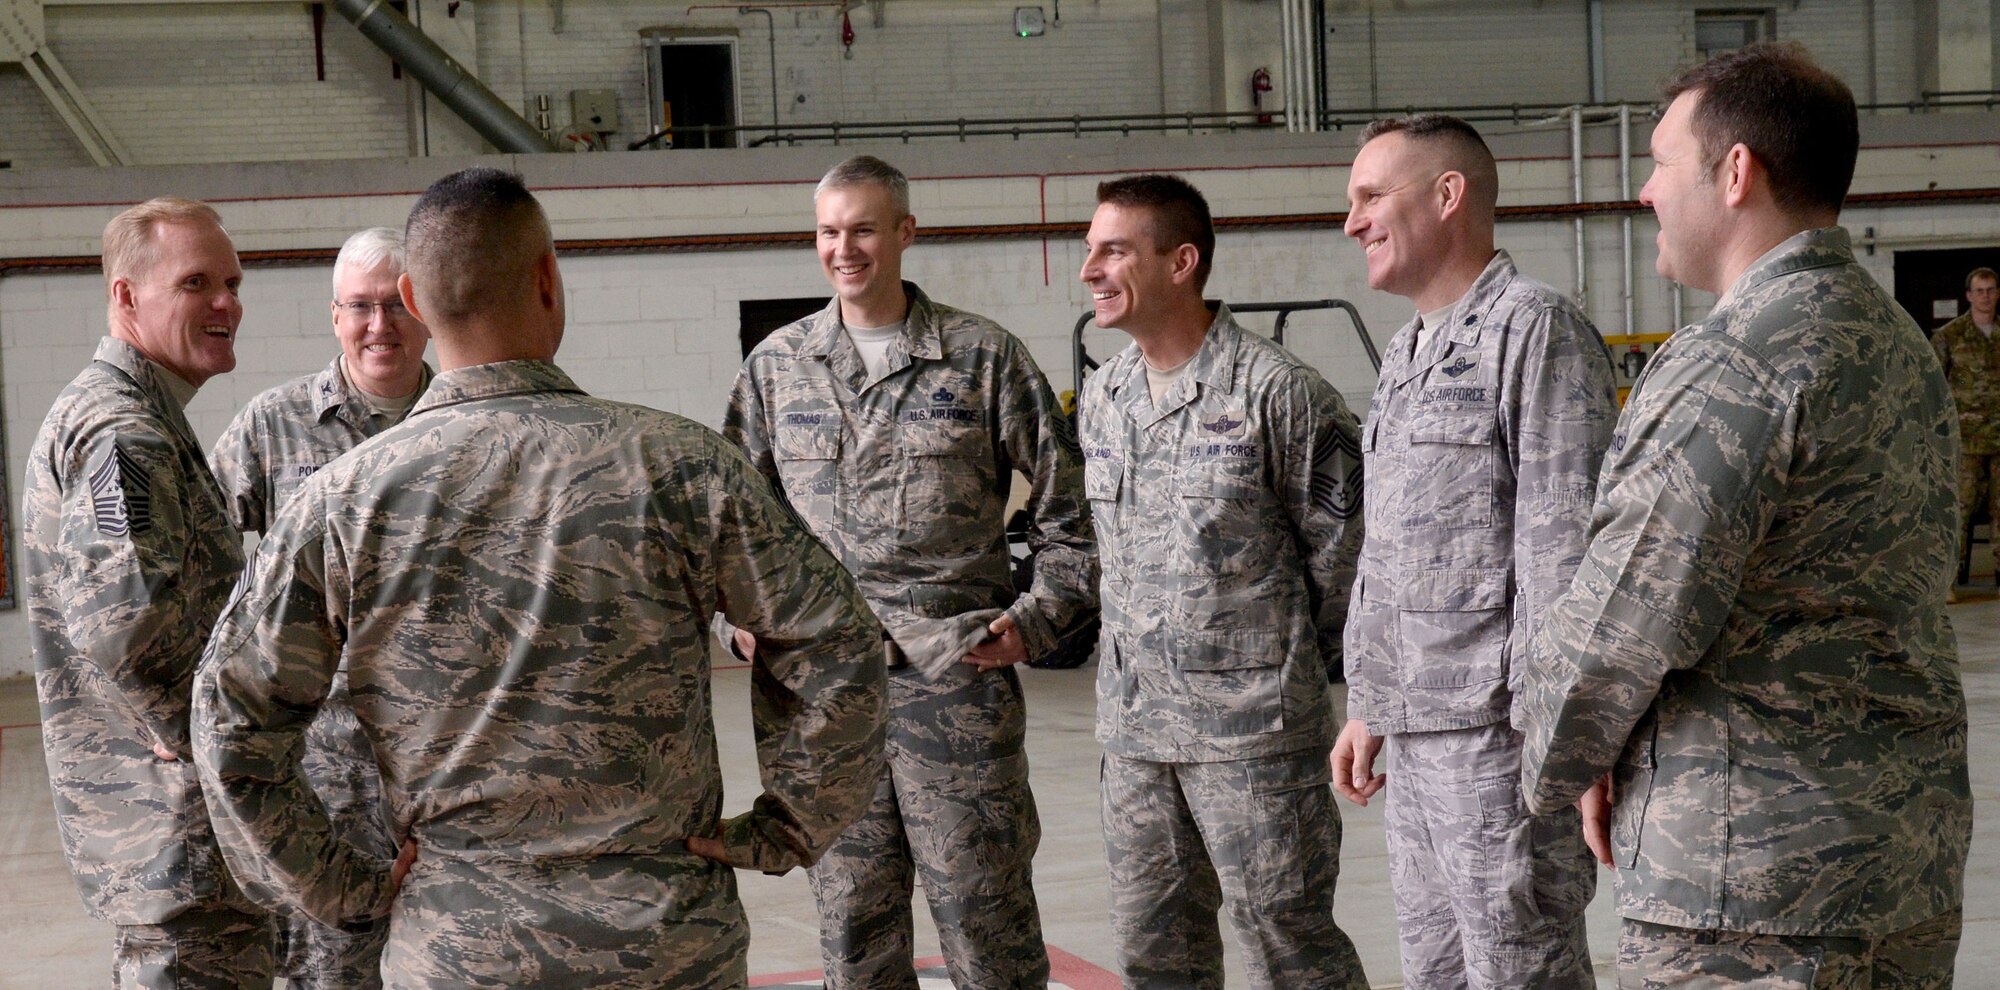 Chief Master Sgt. of the Air Force James Cody meets with leadership from the 352nd Special Operations Wing Jan. 27, 2016, on RAF Mildenhall, England. Leadership led Cody through their units to meet with Airmen and learn about their mission. (U.S. Air Force photo by Airman 1st Class Justine Rho/Released) 